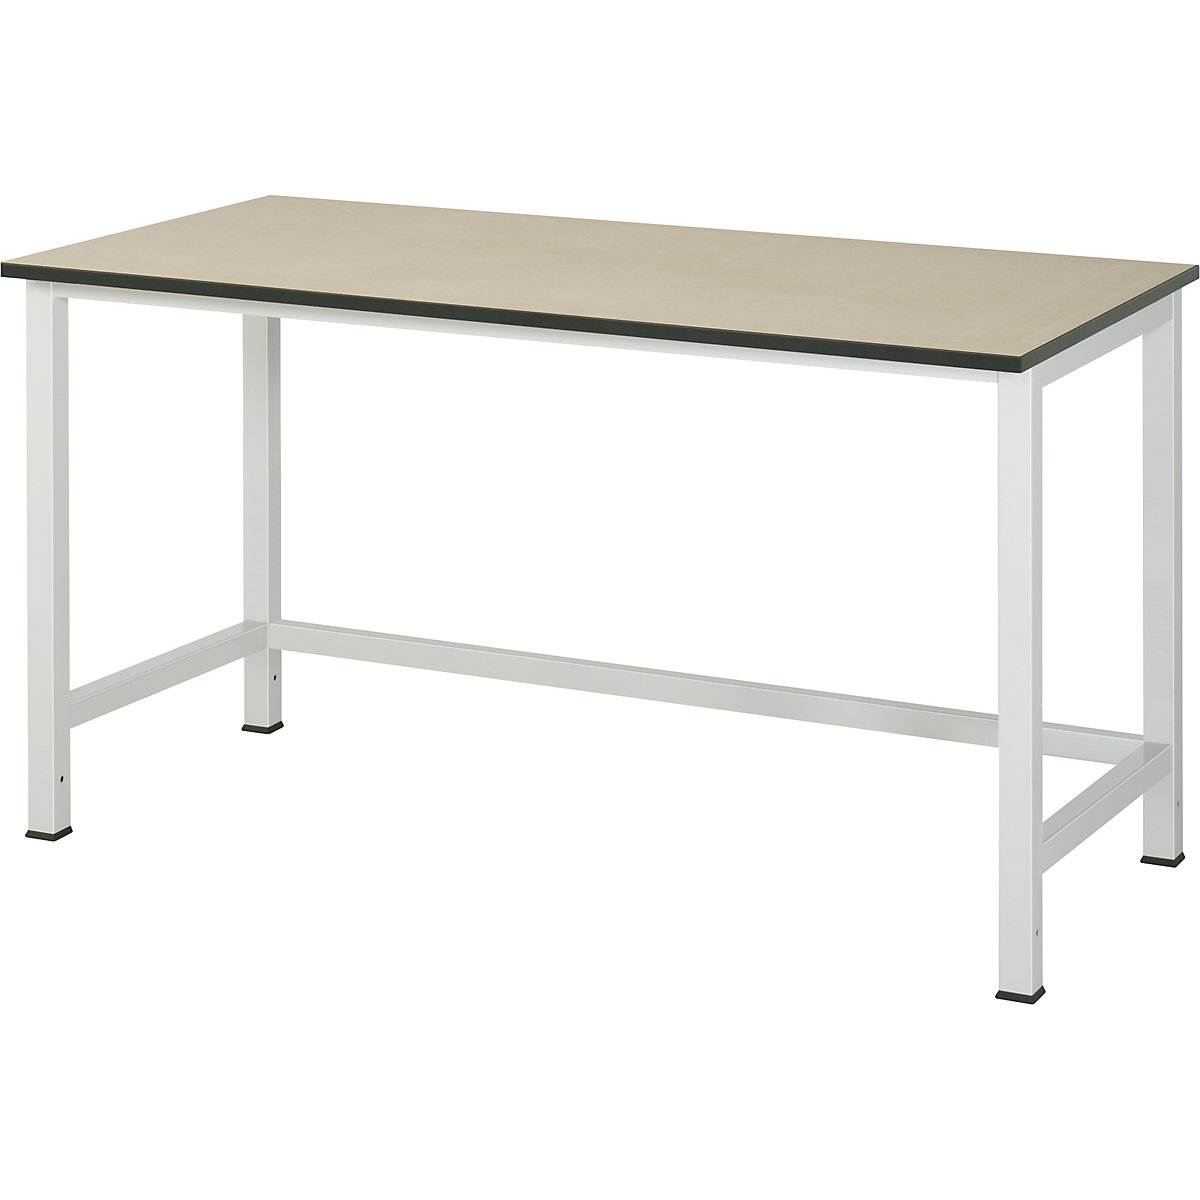 Work table for Series 900 workplace system – RAU, MDF, width 1500 mm-3